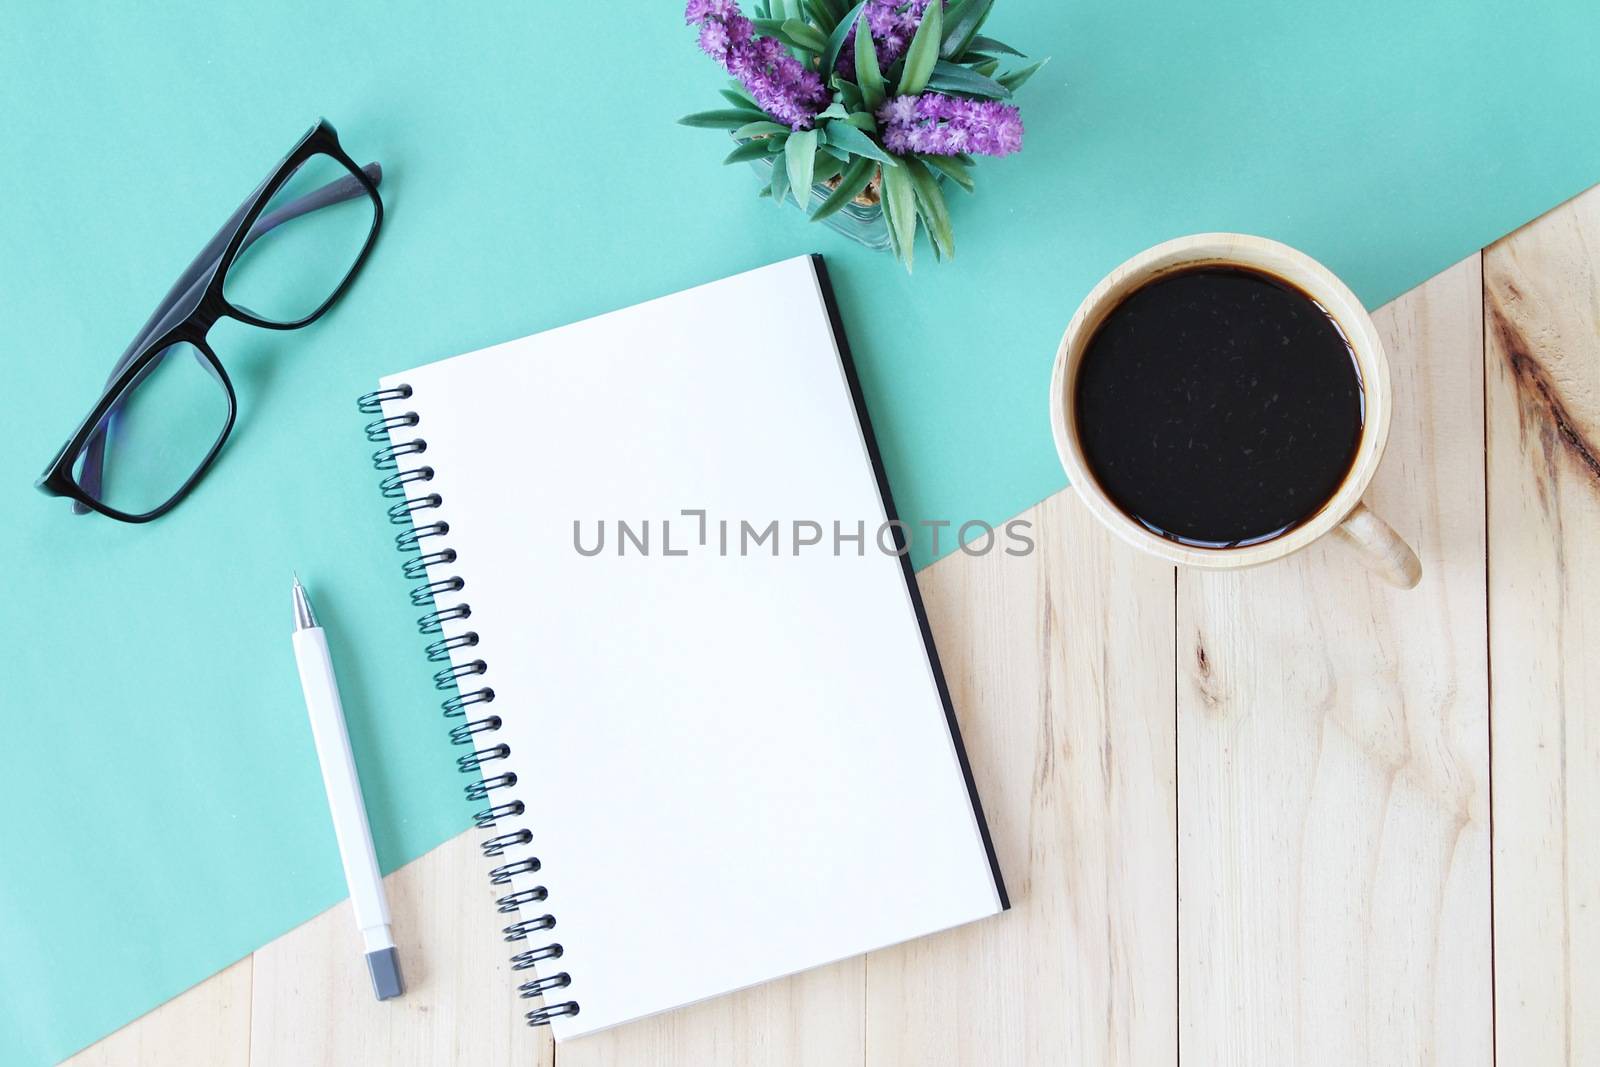 Still life, business, office supplies or education concept : Top view image of open notebook with blank pages and coffee cup on wooden background, ready for adding or mock up